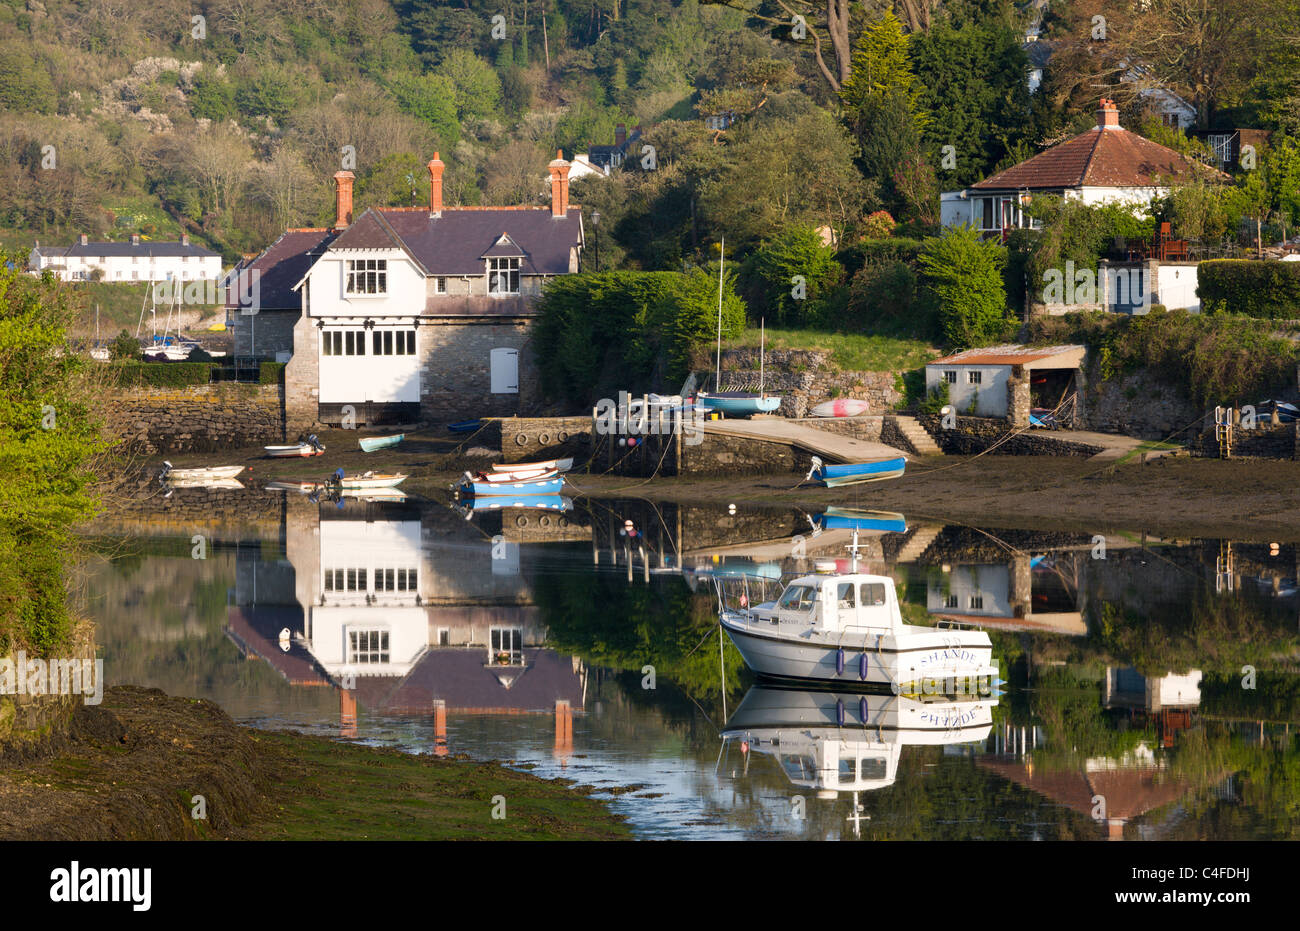 Boats and houses beside the River Yealm in the picturesque South Hams village of Newton Ferrers, Devon, England. Stock Photo